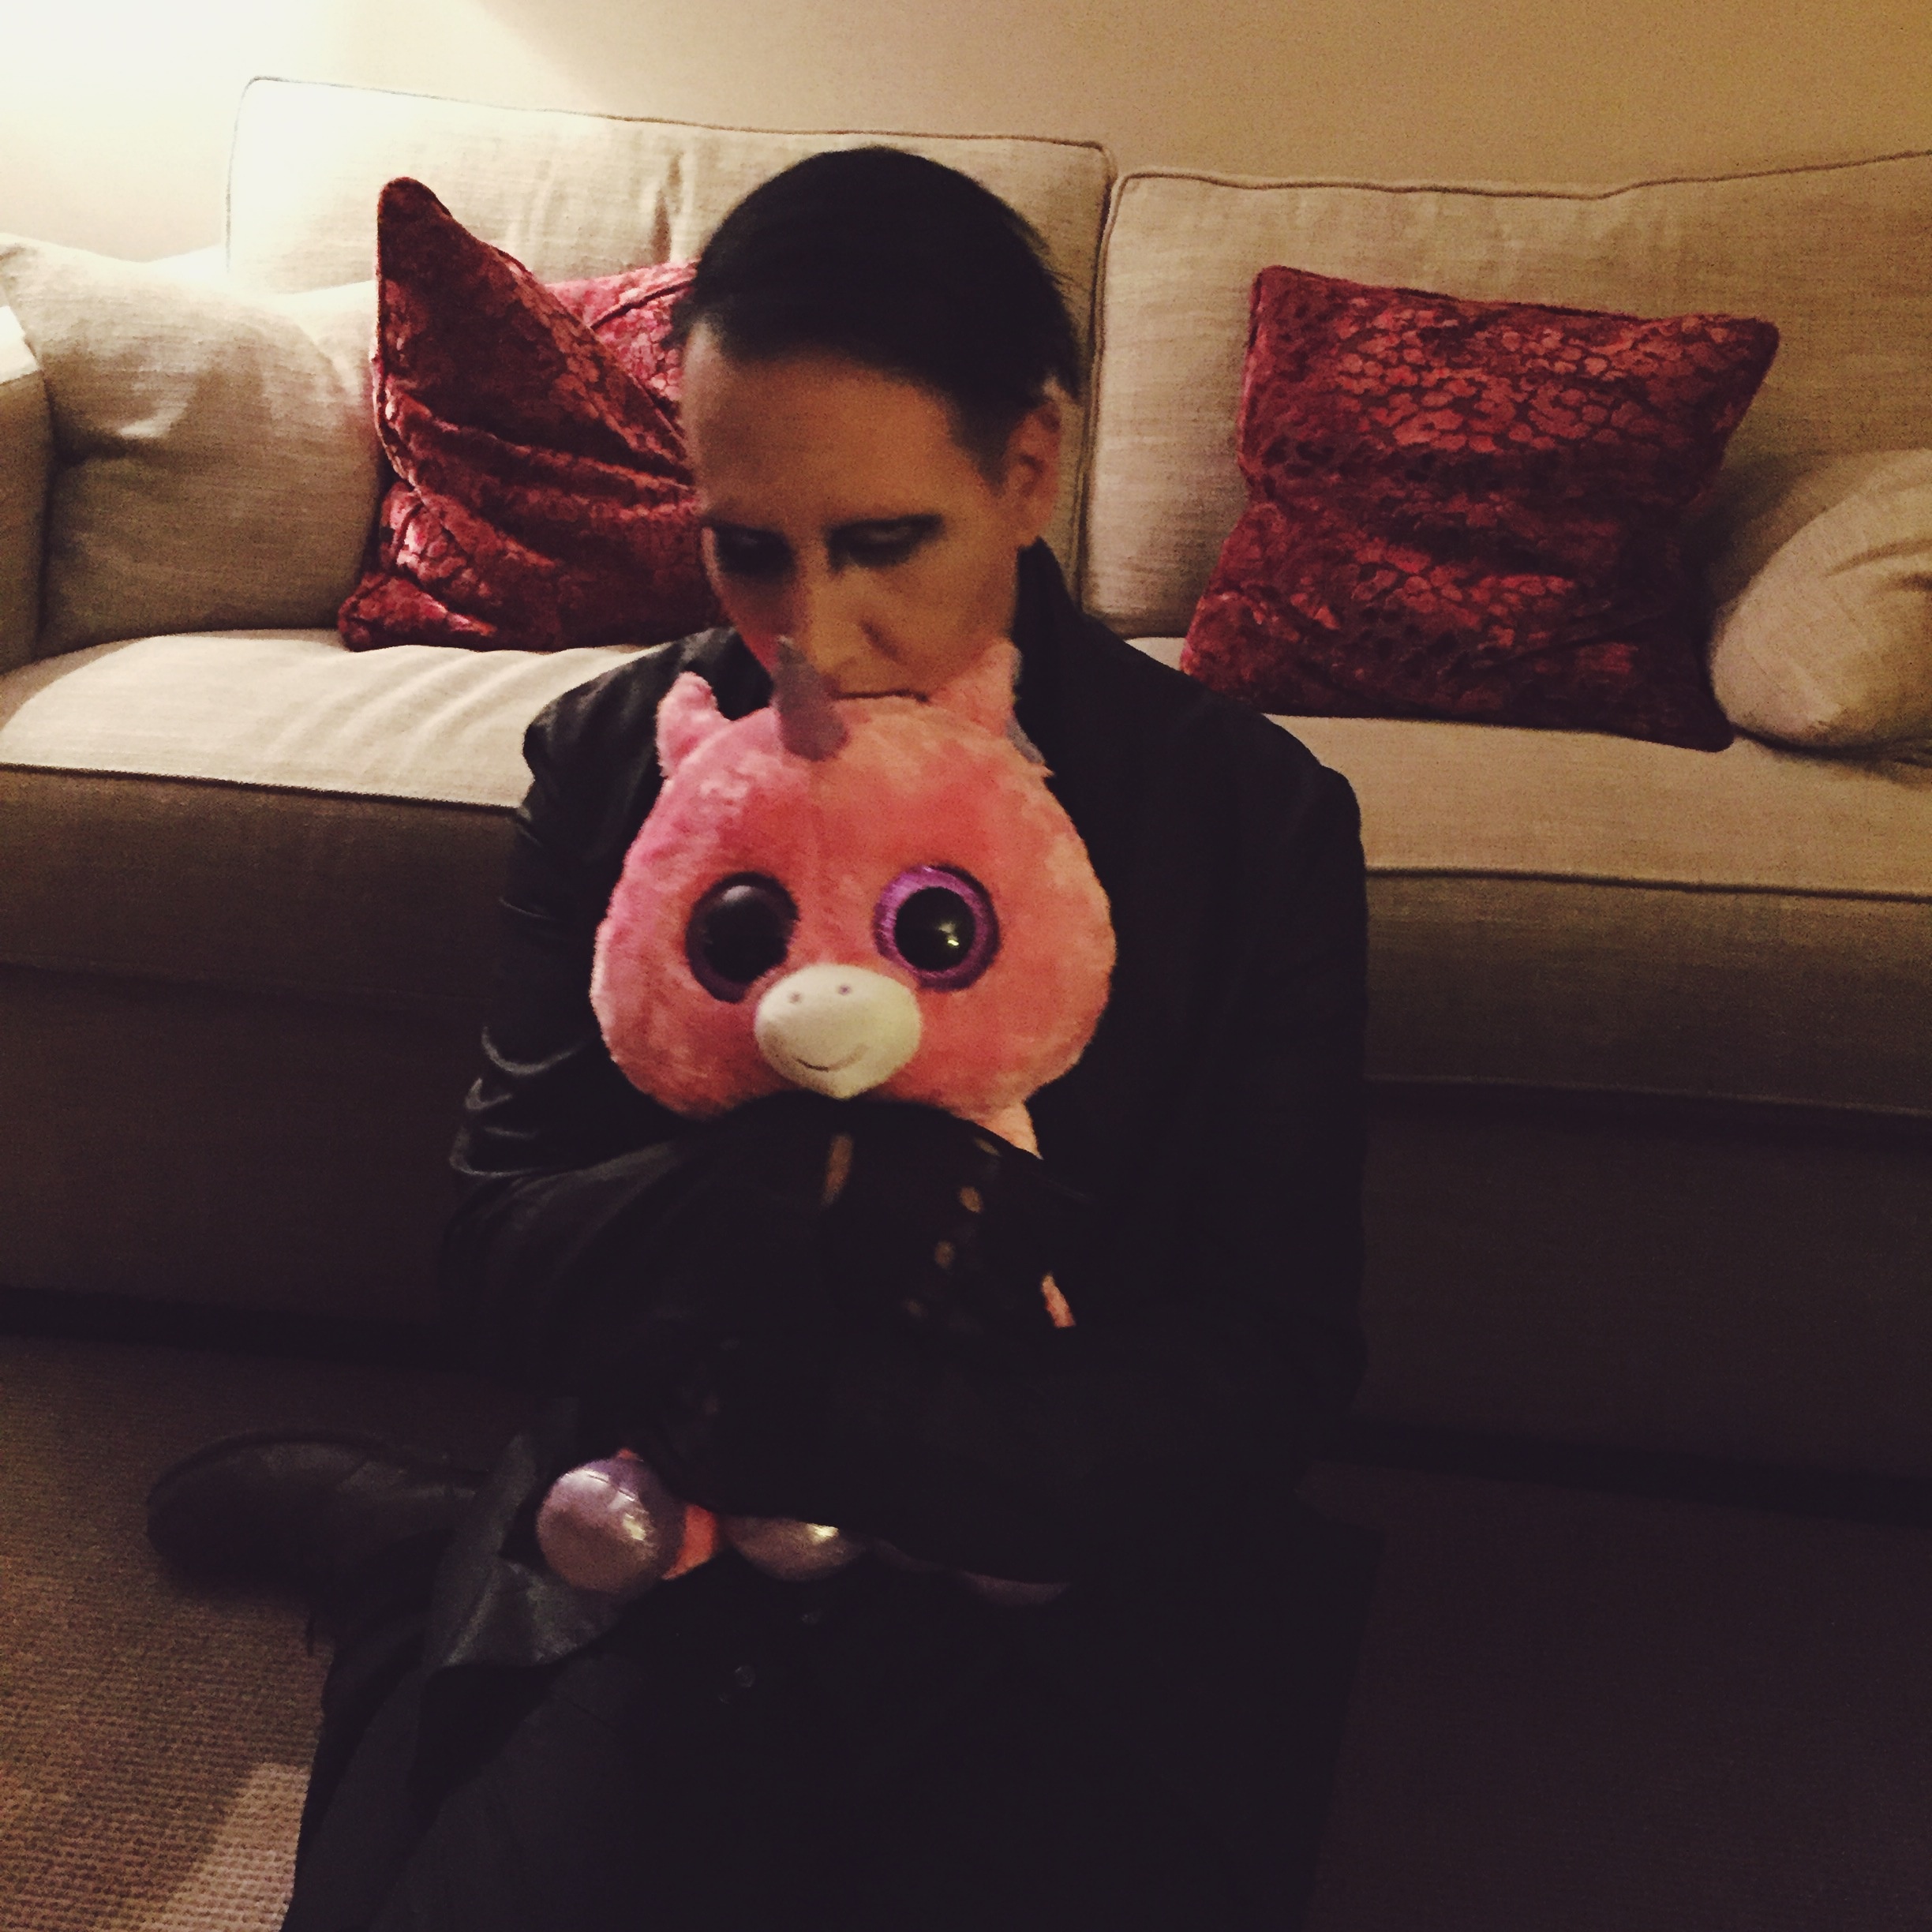 I Gave Marilyn Manson a Pink Stuffed Unicorn and He Gave Me Sex Tips